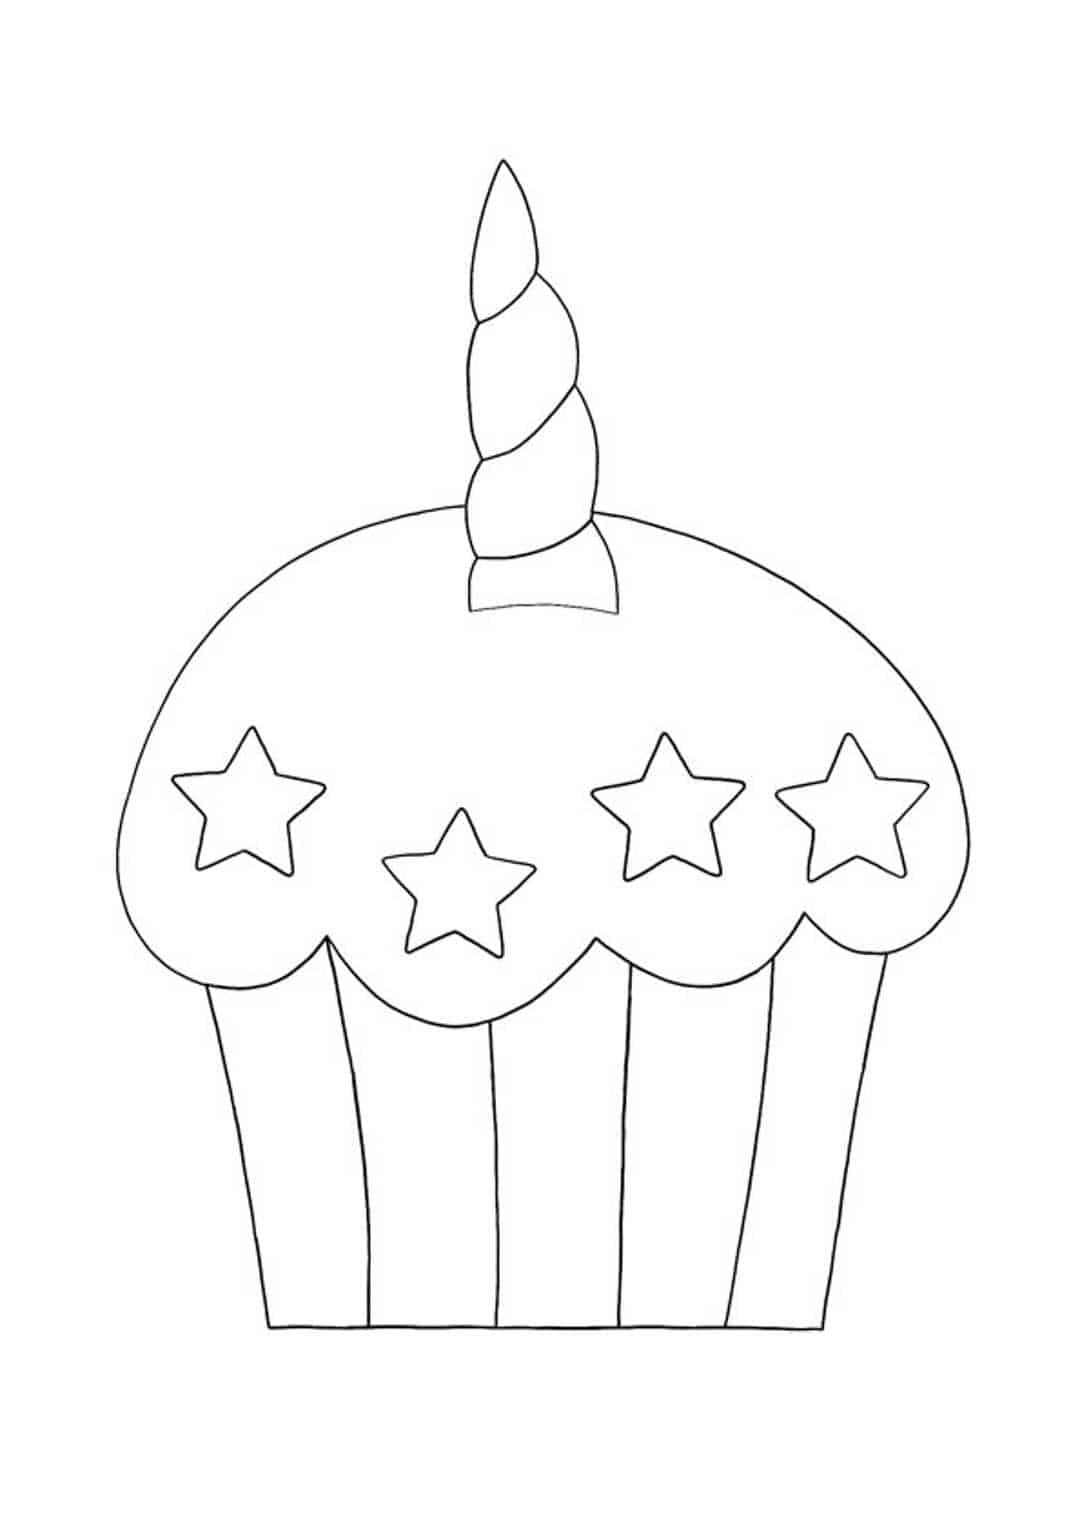 Unicorn Cake Colouring Pages : free for commercial use high quality images.